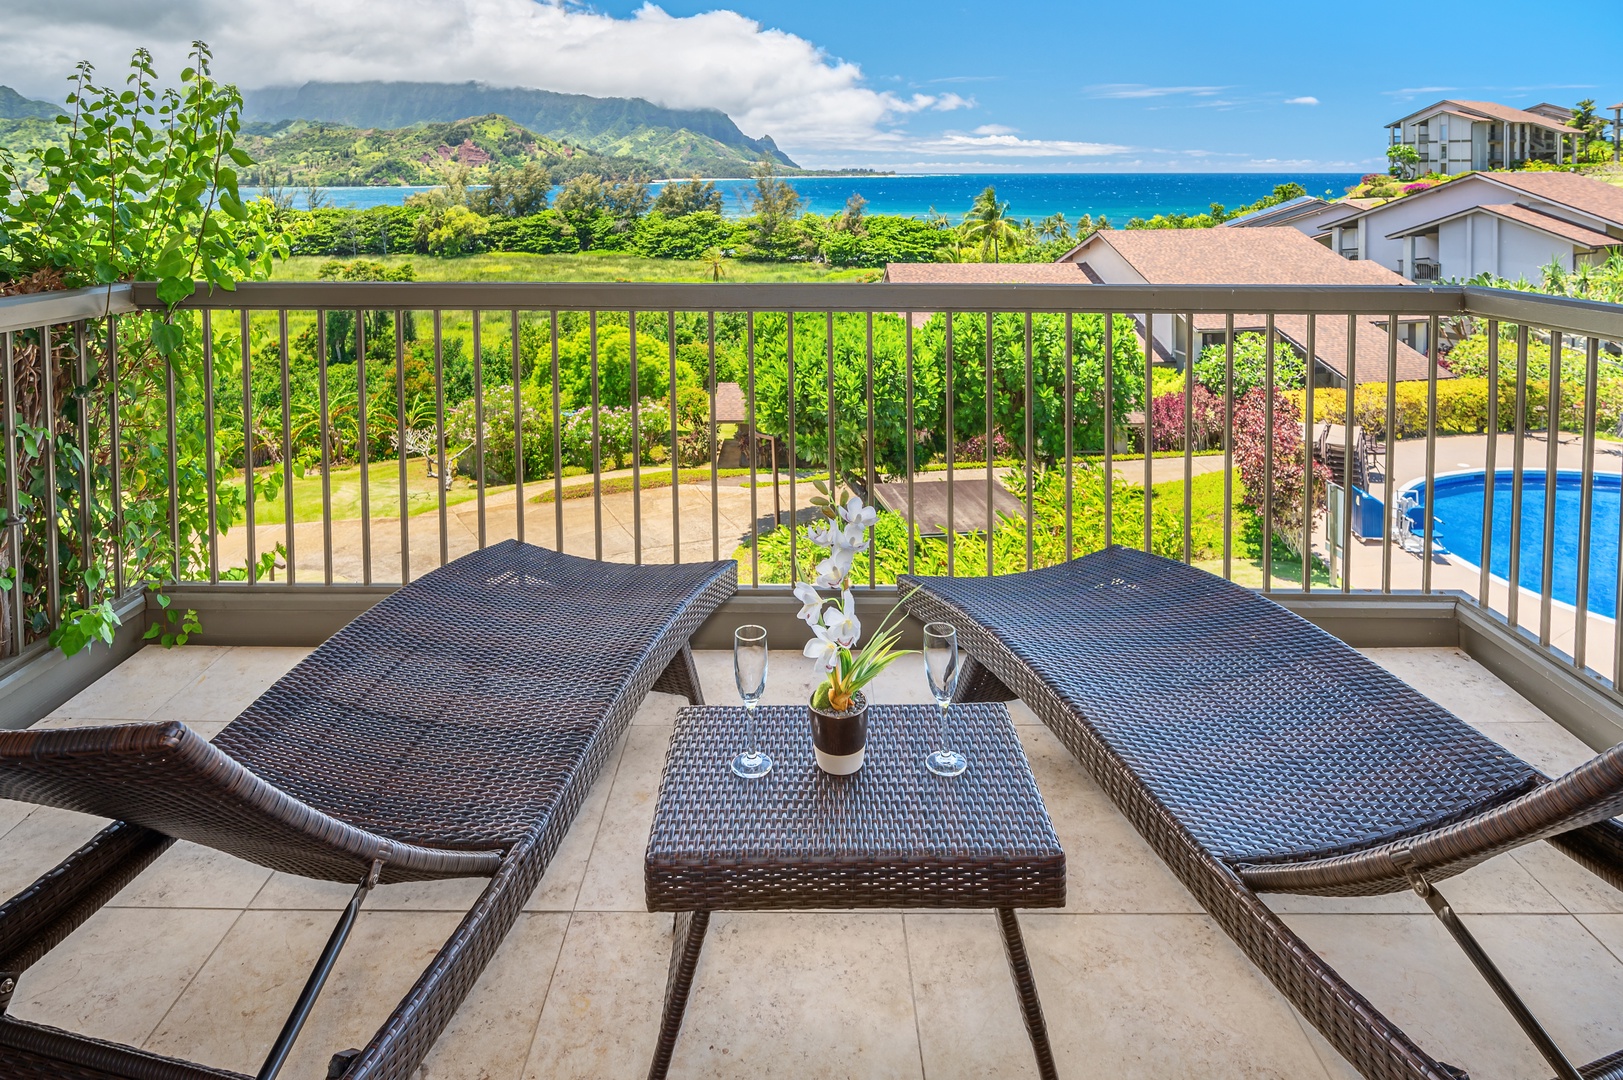 Princeville Vacation Rentals, Hanalei Bay Resort 7307 - Time tends to slow down on Kaua’i, so opportunities abound to soak in the mountain and ocean views from the unit’s lanai